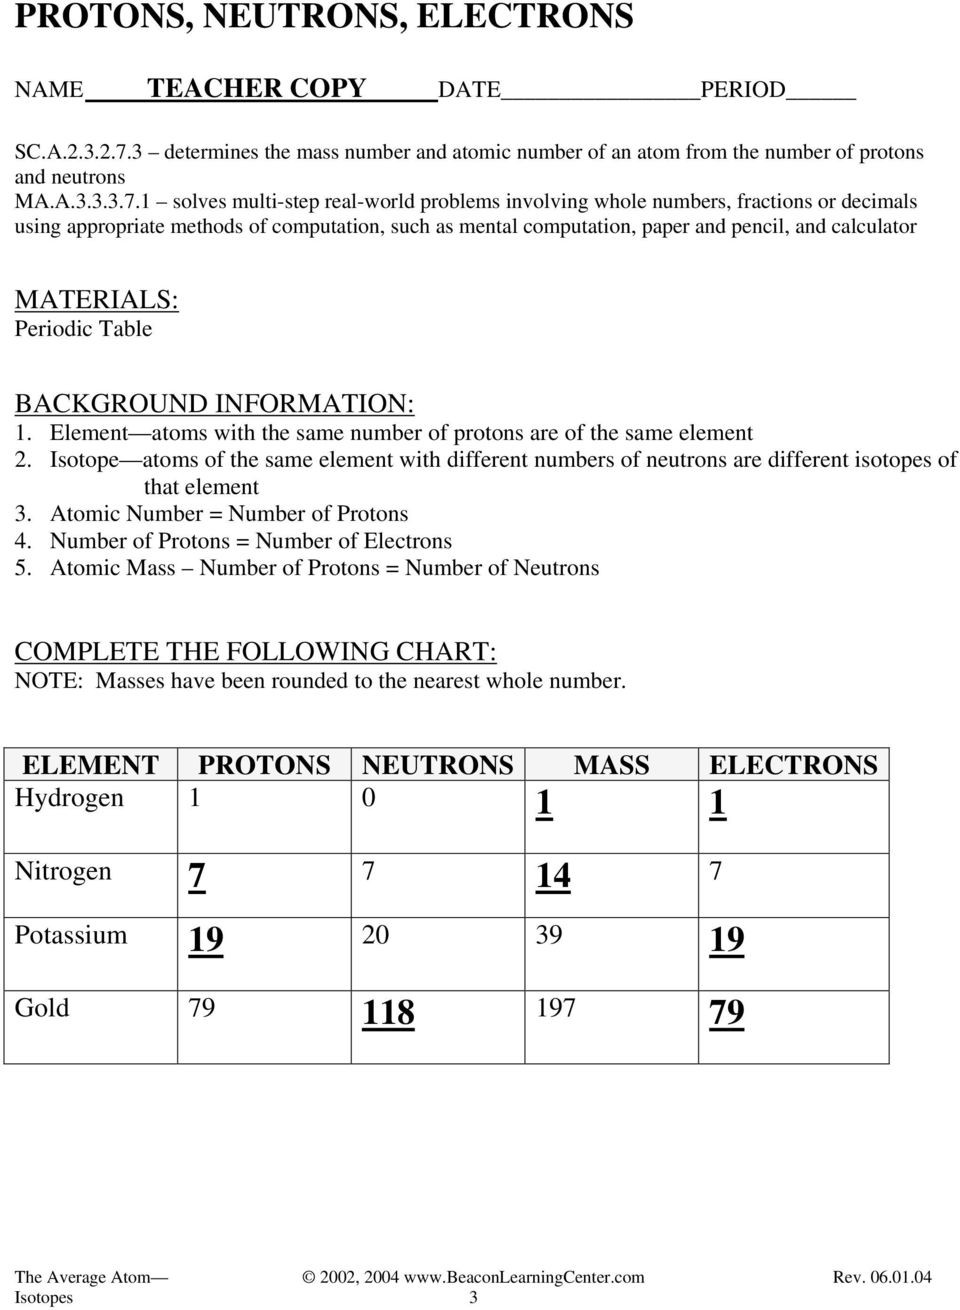 Protons Neutrons and Electrons Worksheet Protons Neutrons Electrons Pdf Free Download